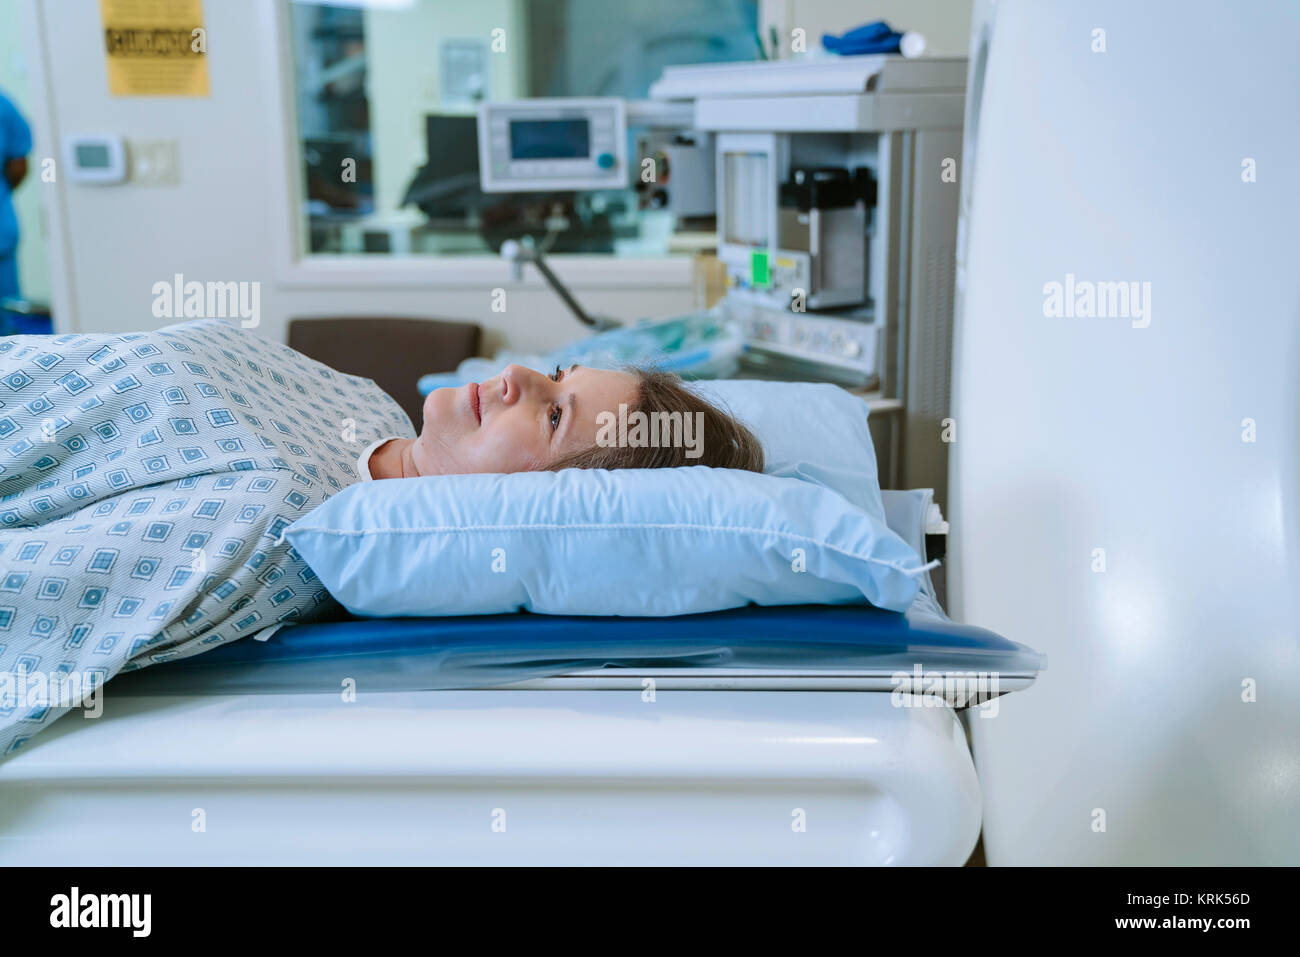 Caucasian woman laying on scanner table Stock Photo